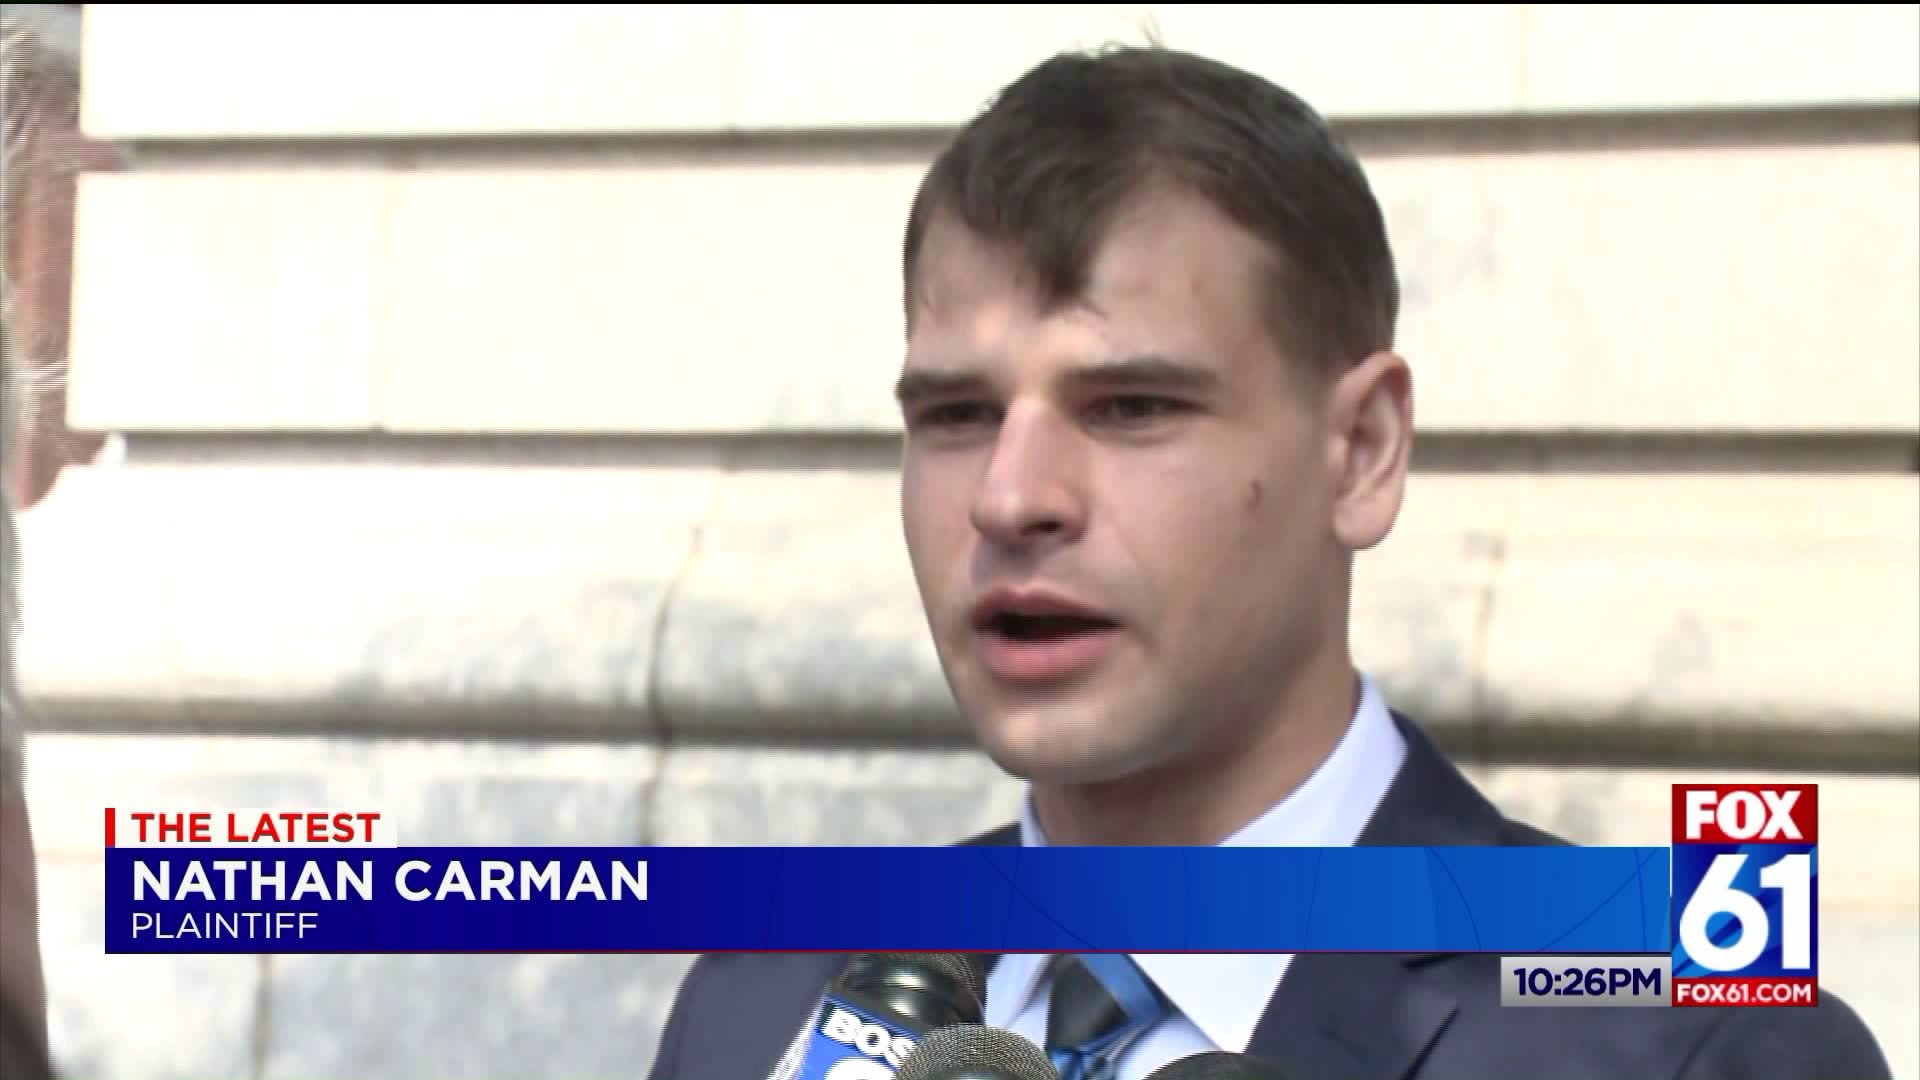 Nathan Carman speaks after closing arguments in insurance case